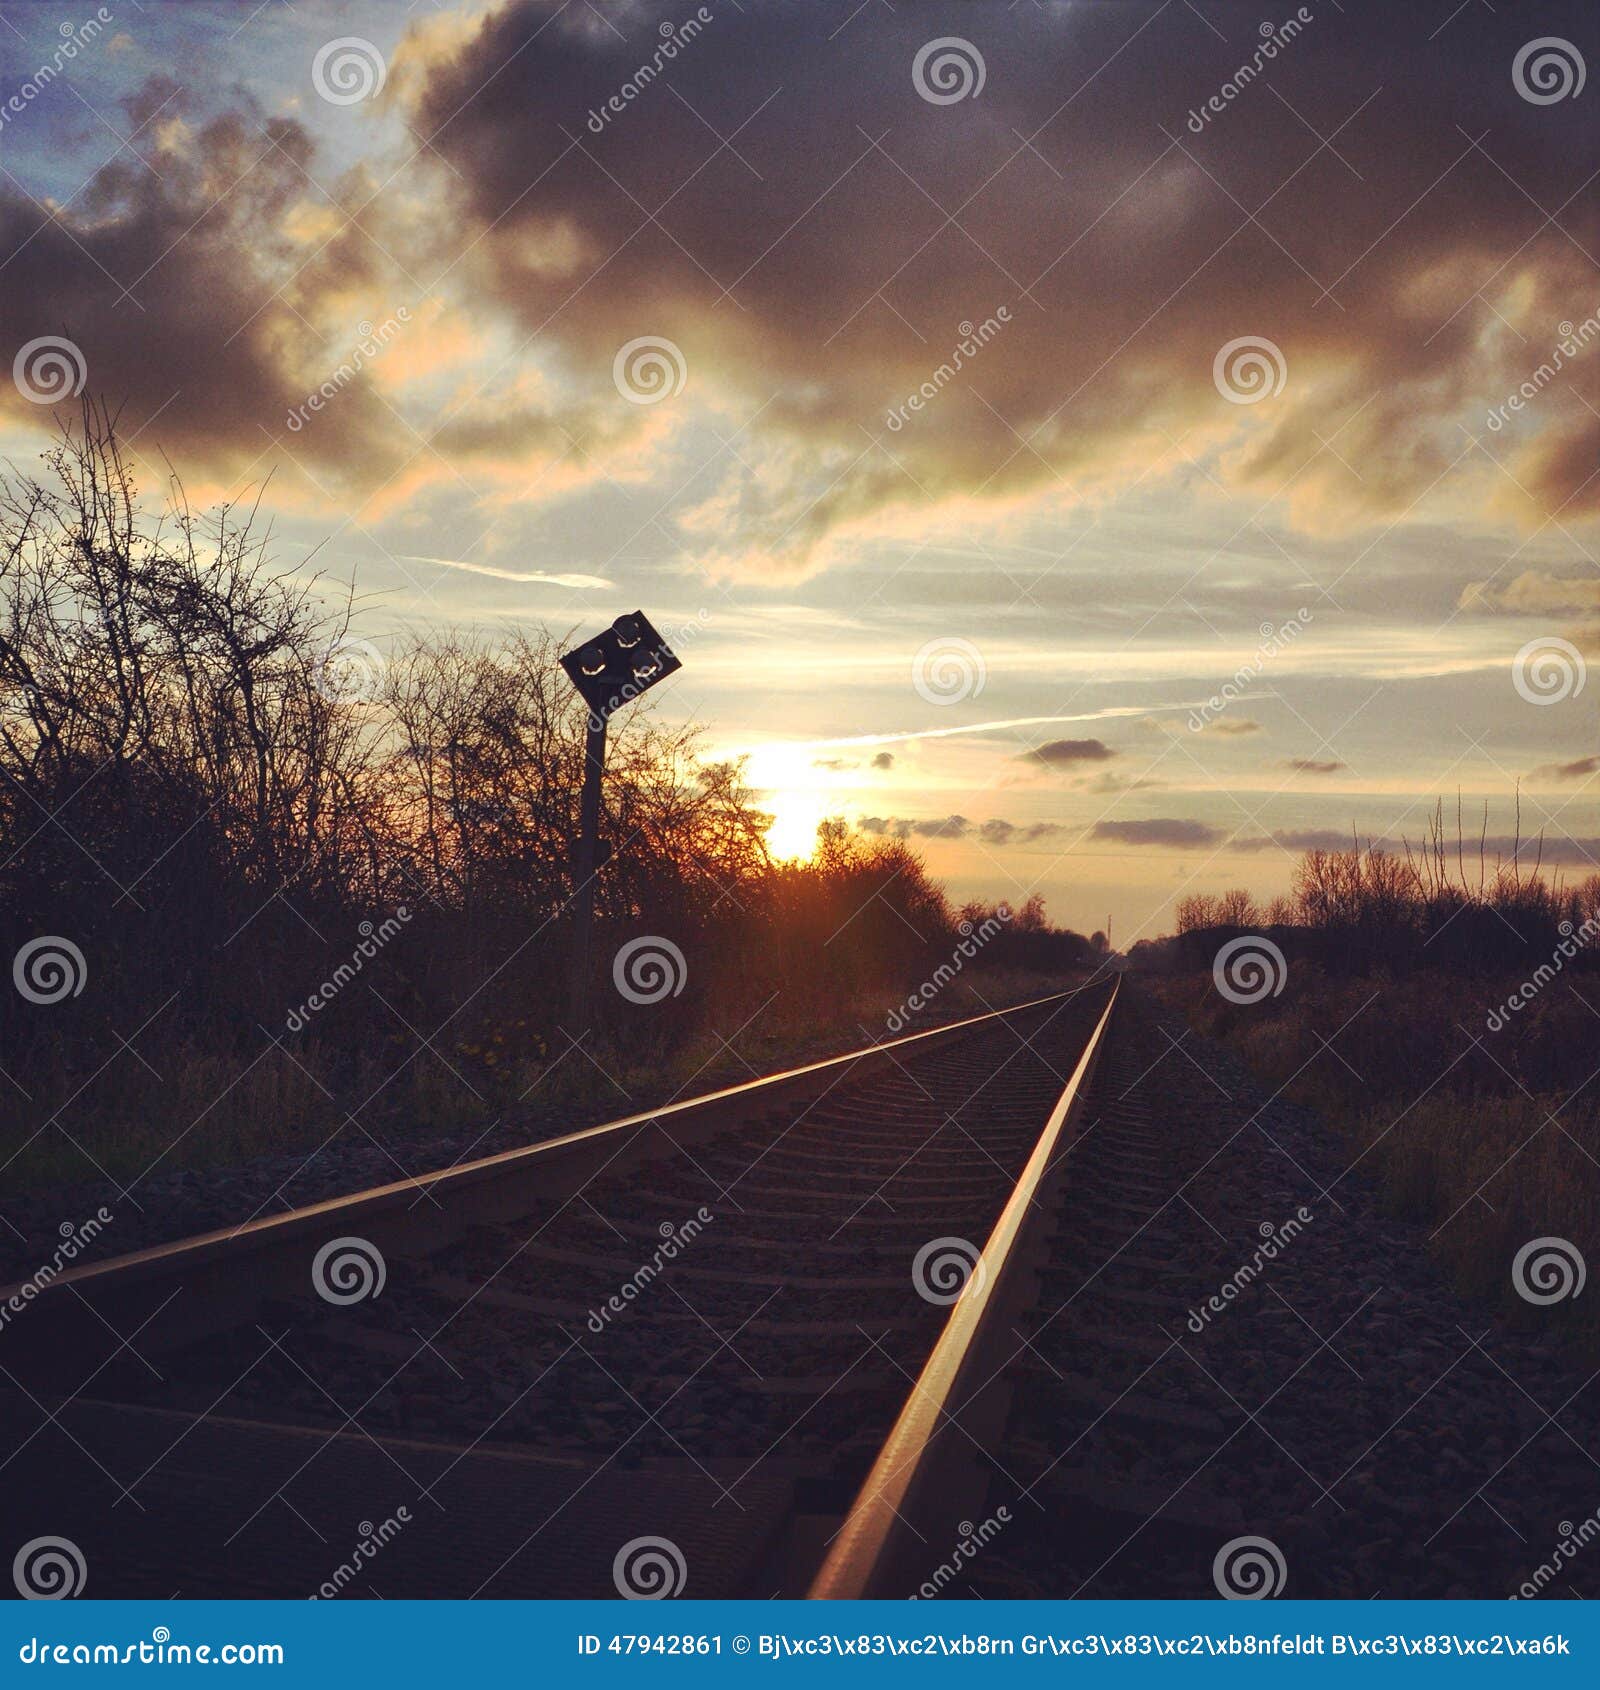 railroad in the sunset